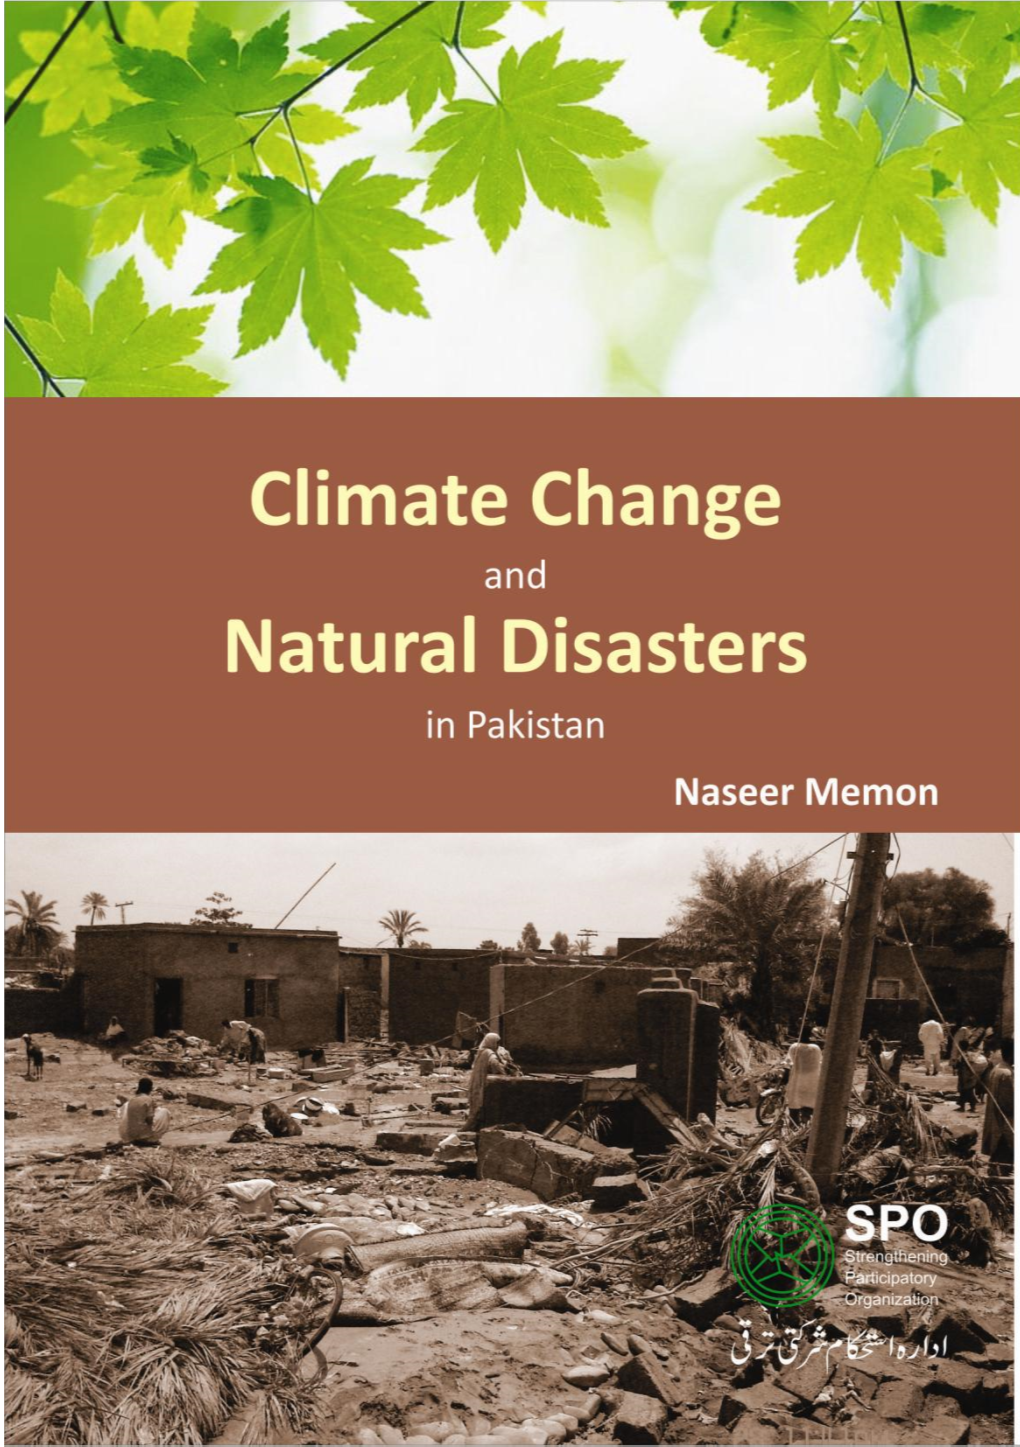 Climate Change and Natural Disasters in Pakistan